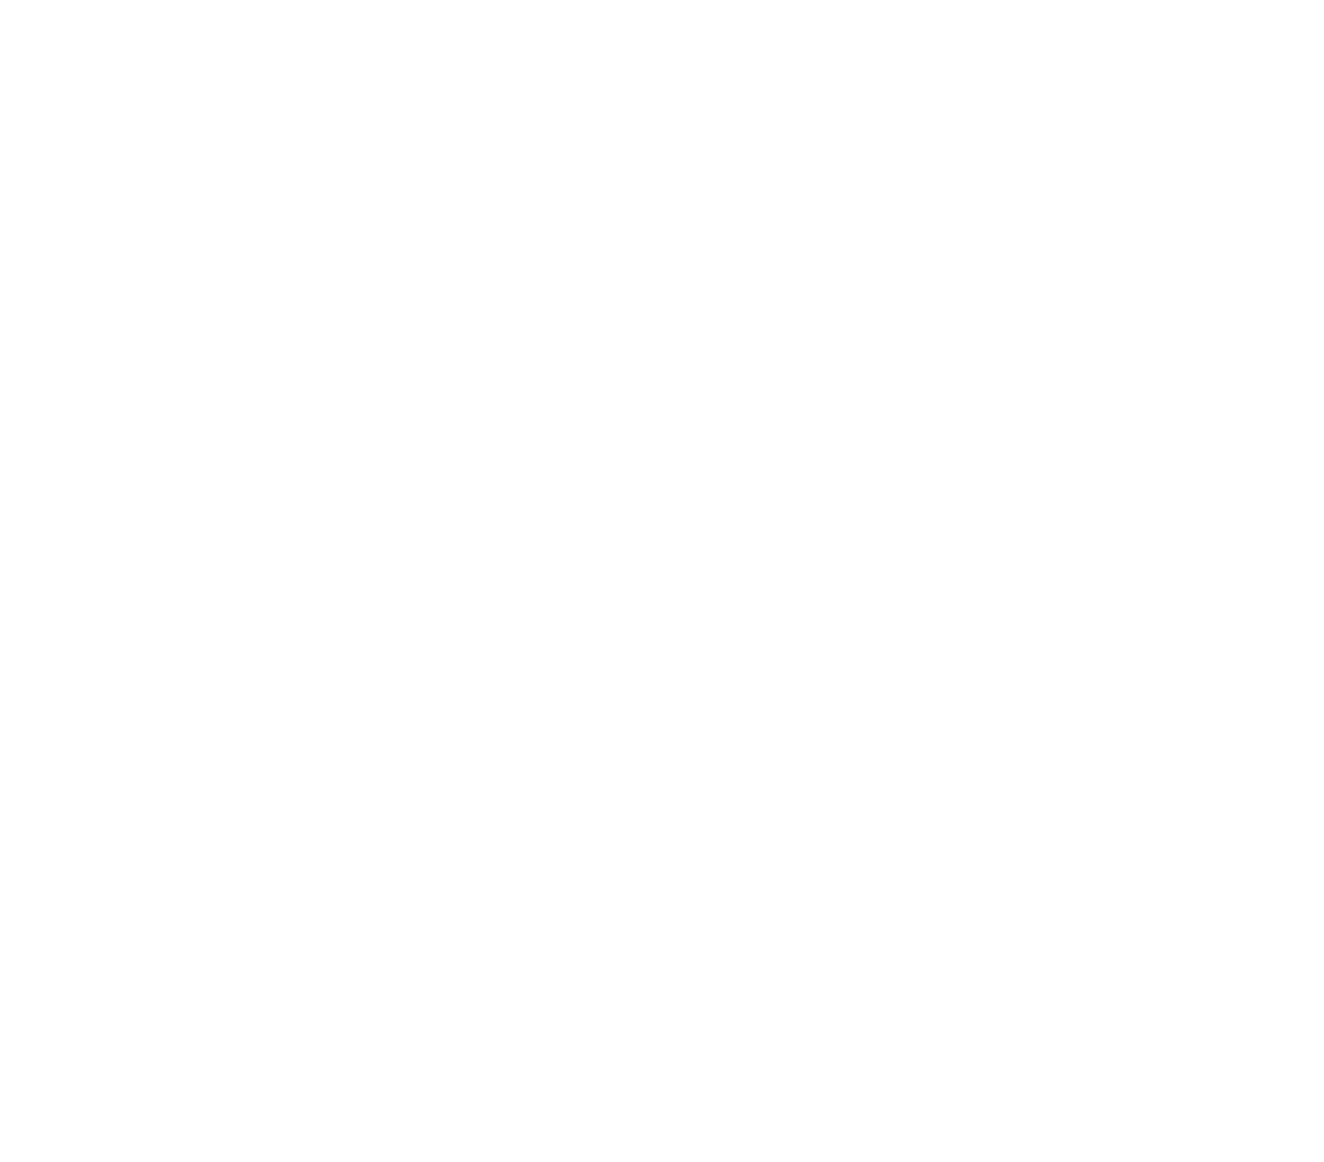 Million-Dollar-Markdown-Event-white.png__PID:166f368e-8c1d-432c-8a09-93b9ae35ee7e